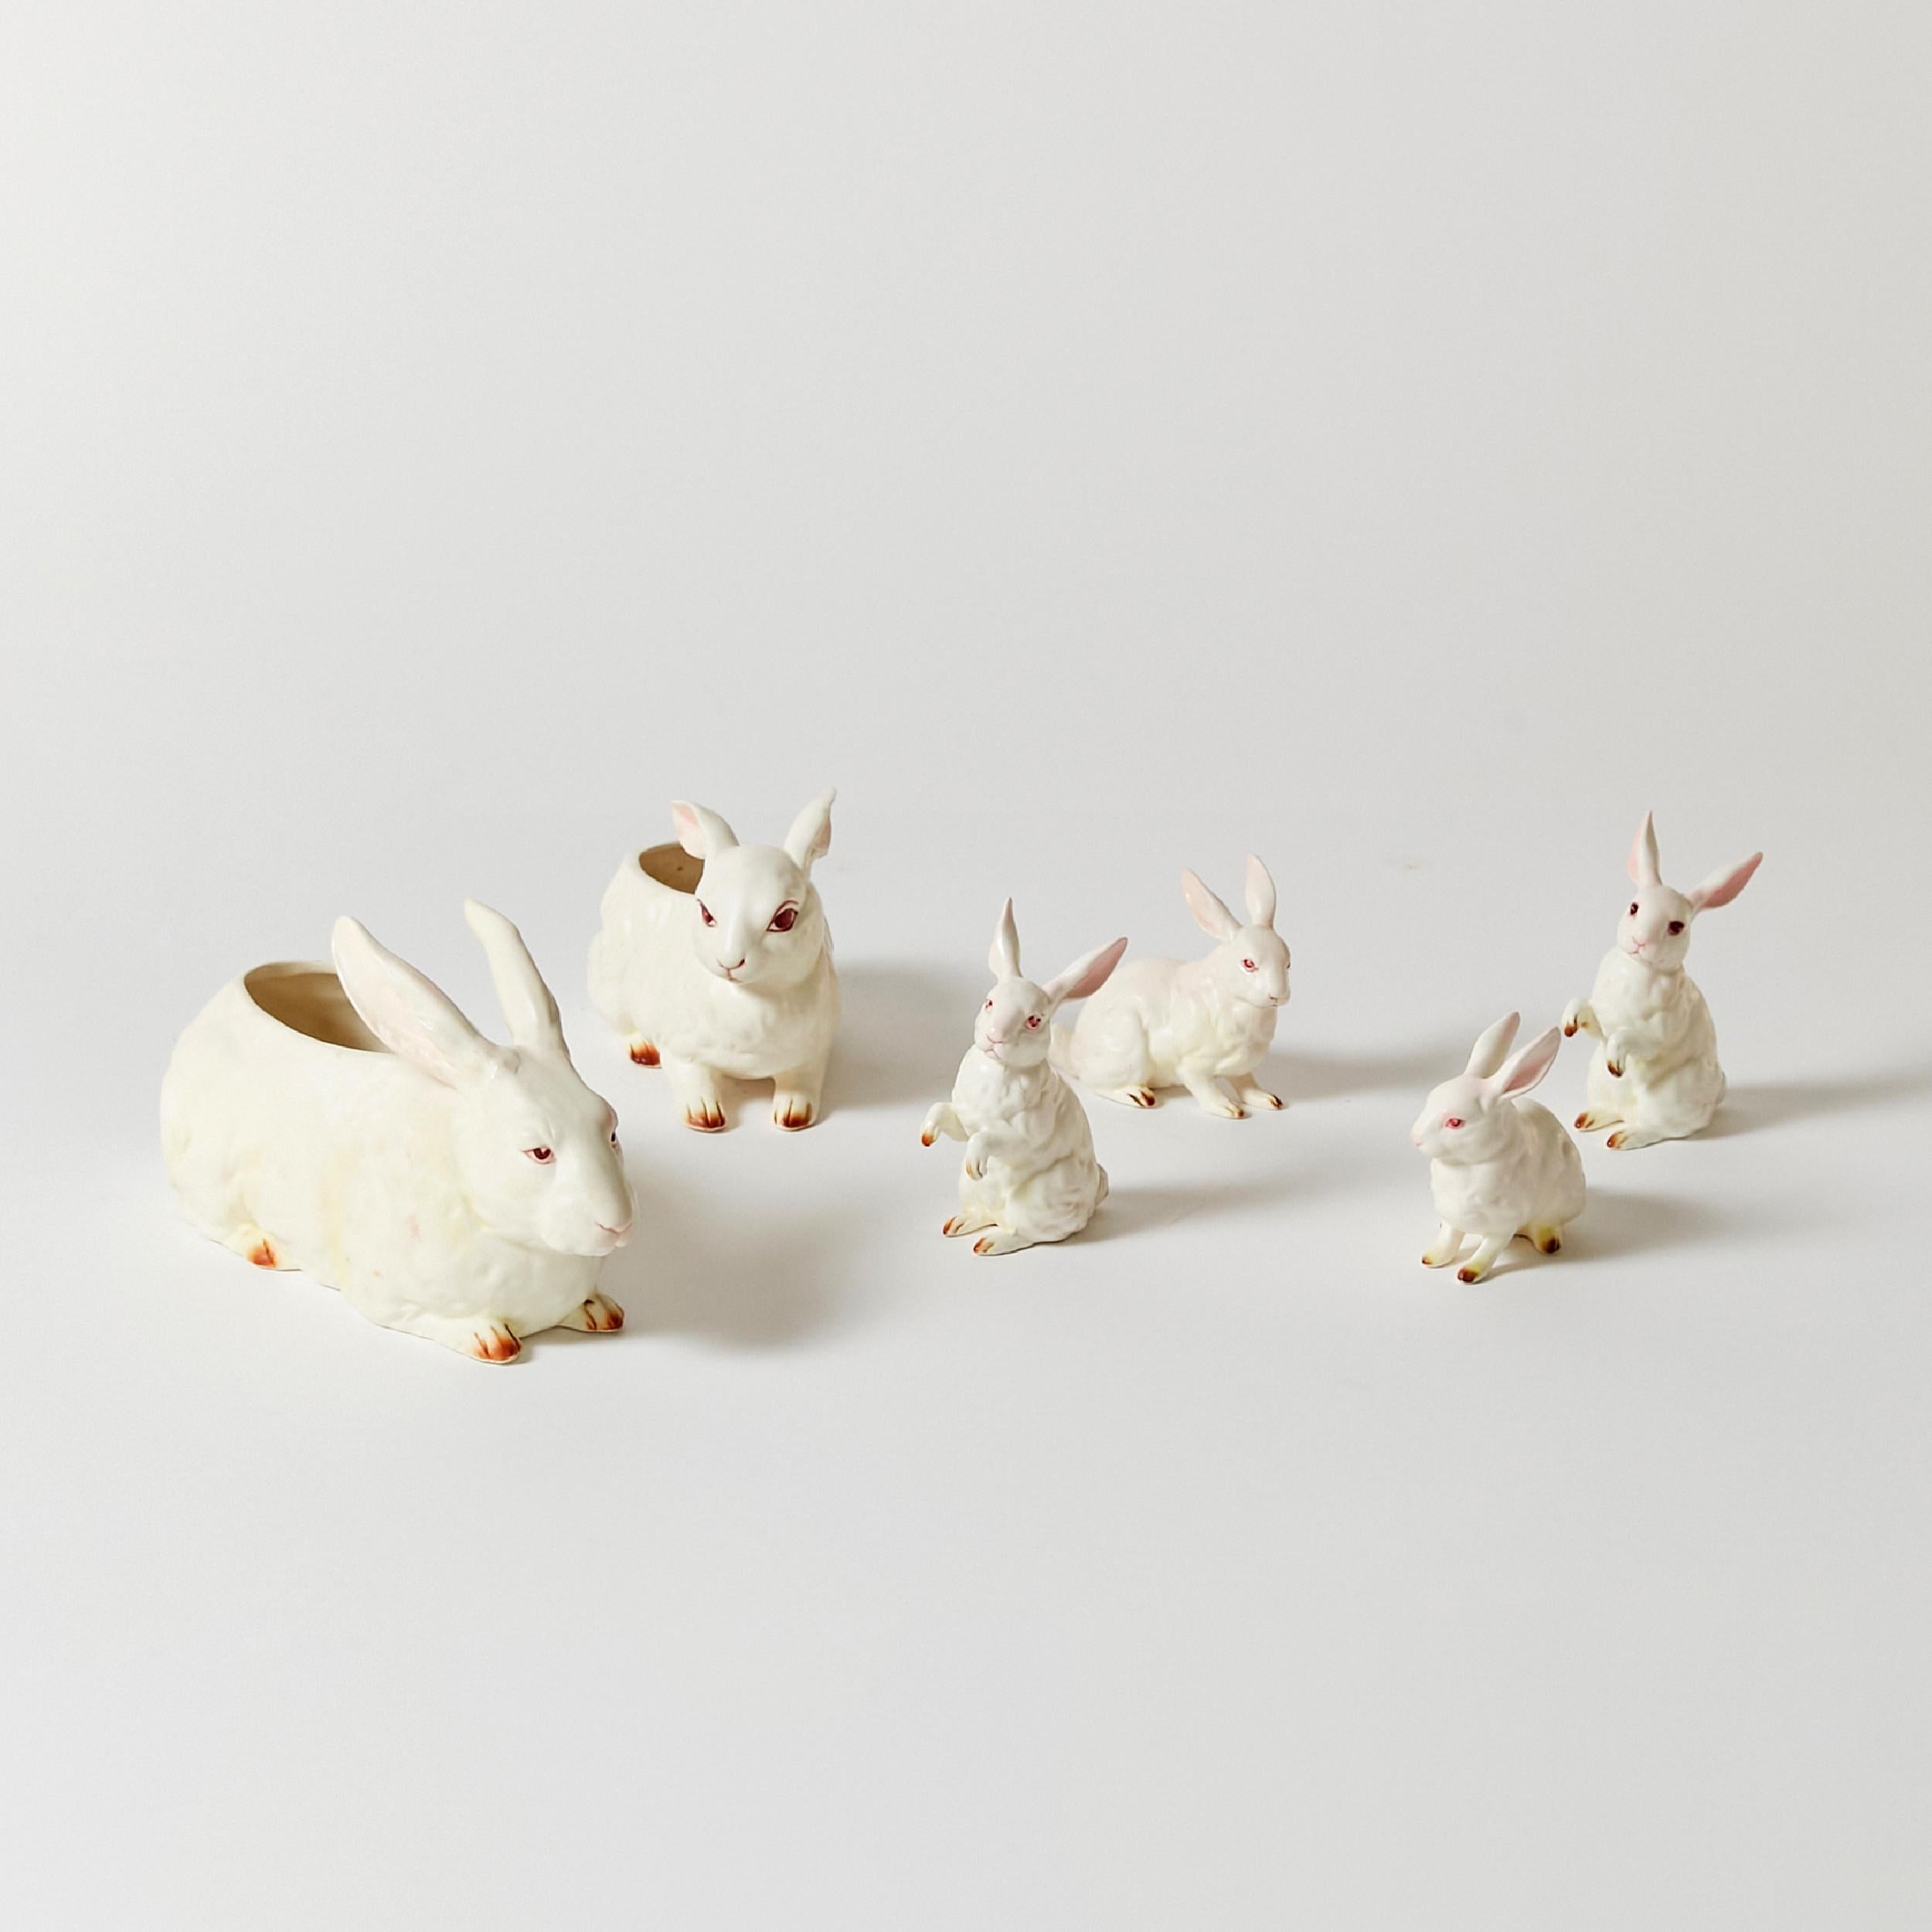 Set of ten hand painted porcelain Lefton bunnies in different sizes. The biggest bunnies are hollow, and work as a shallow vase or candy bowl.
These pieces were made in Japan in 1960.
Range of dimensions
Big bunny
Height 5.5 in / 13.97 cm
Width